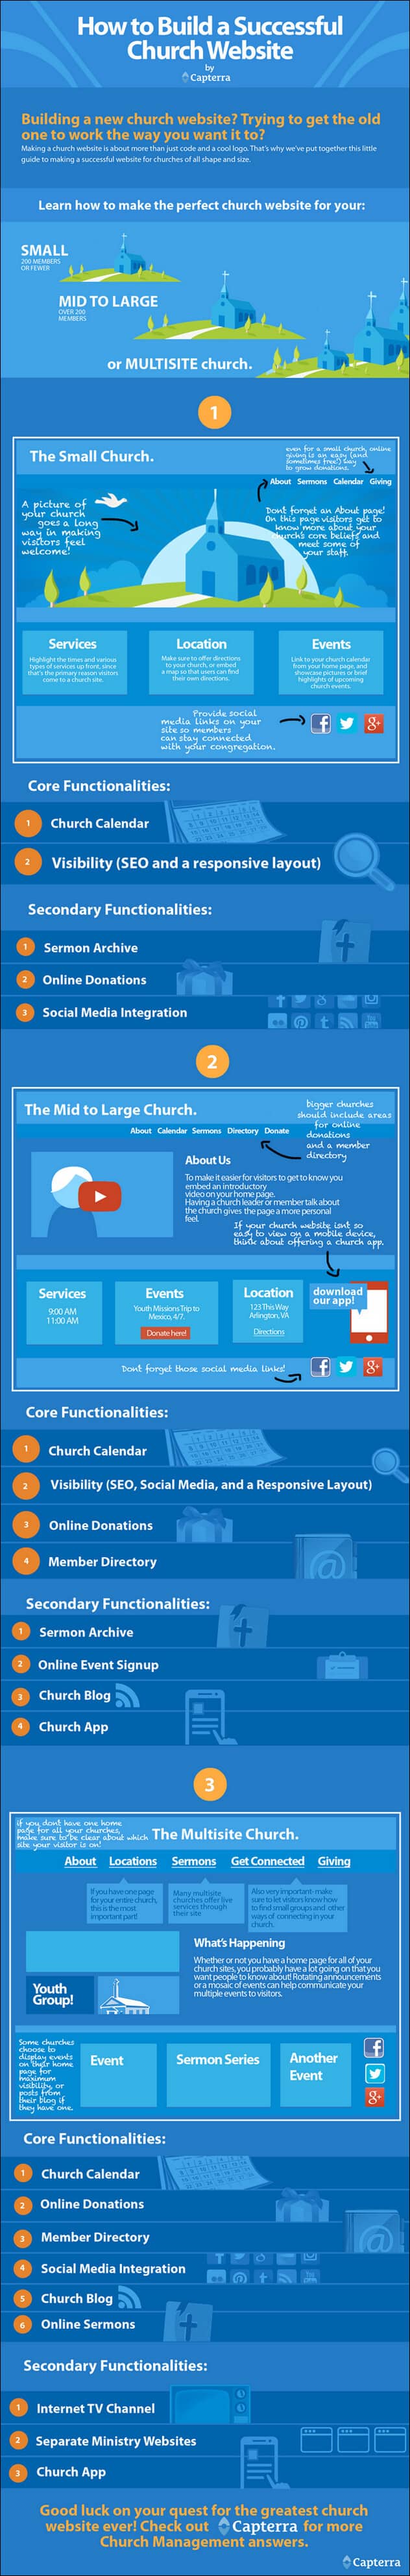 How to Build a Successful Church Website